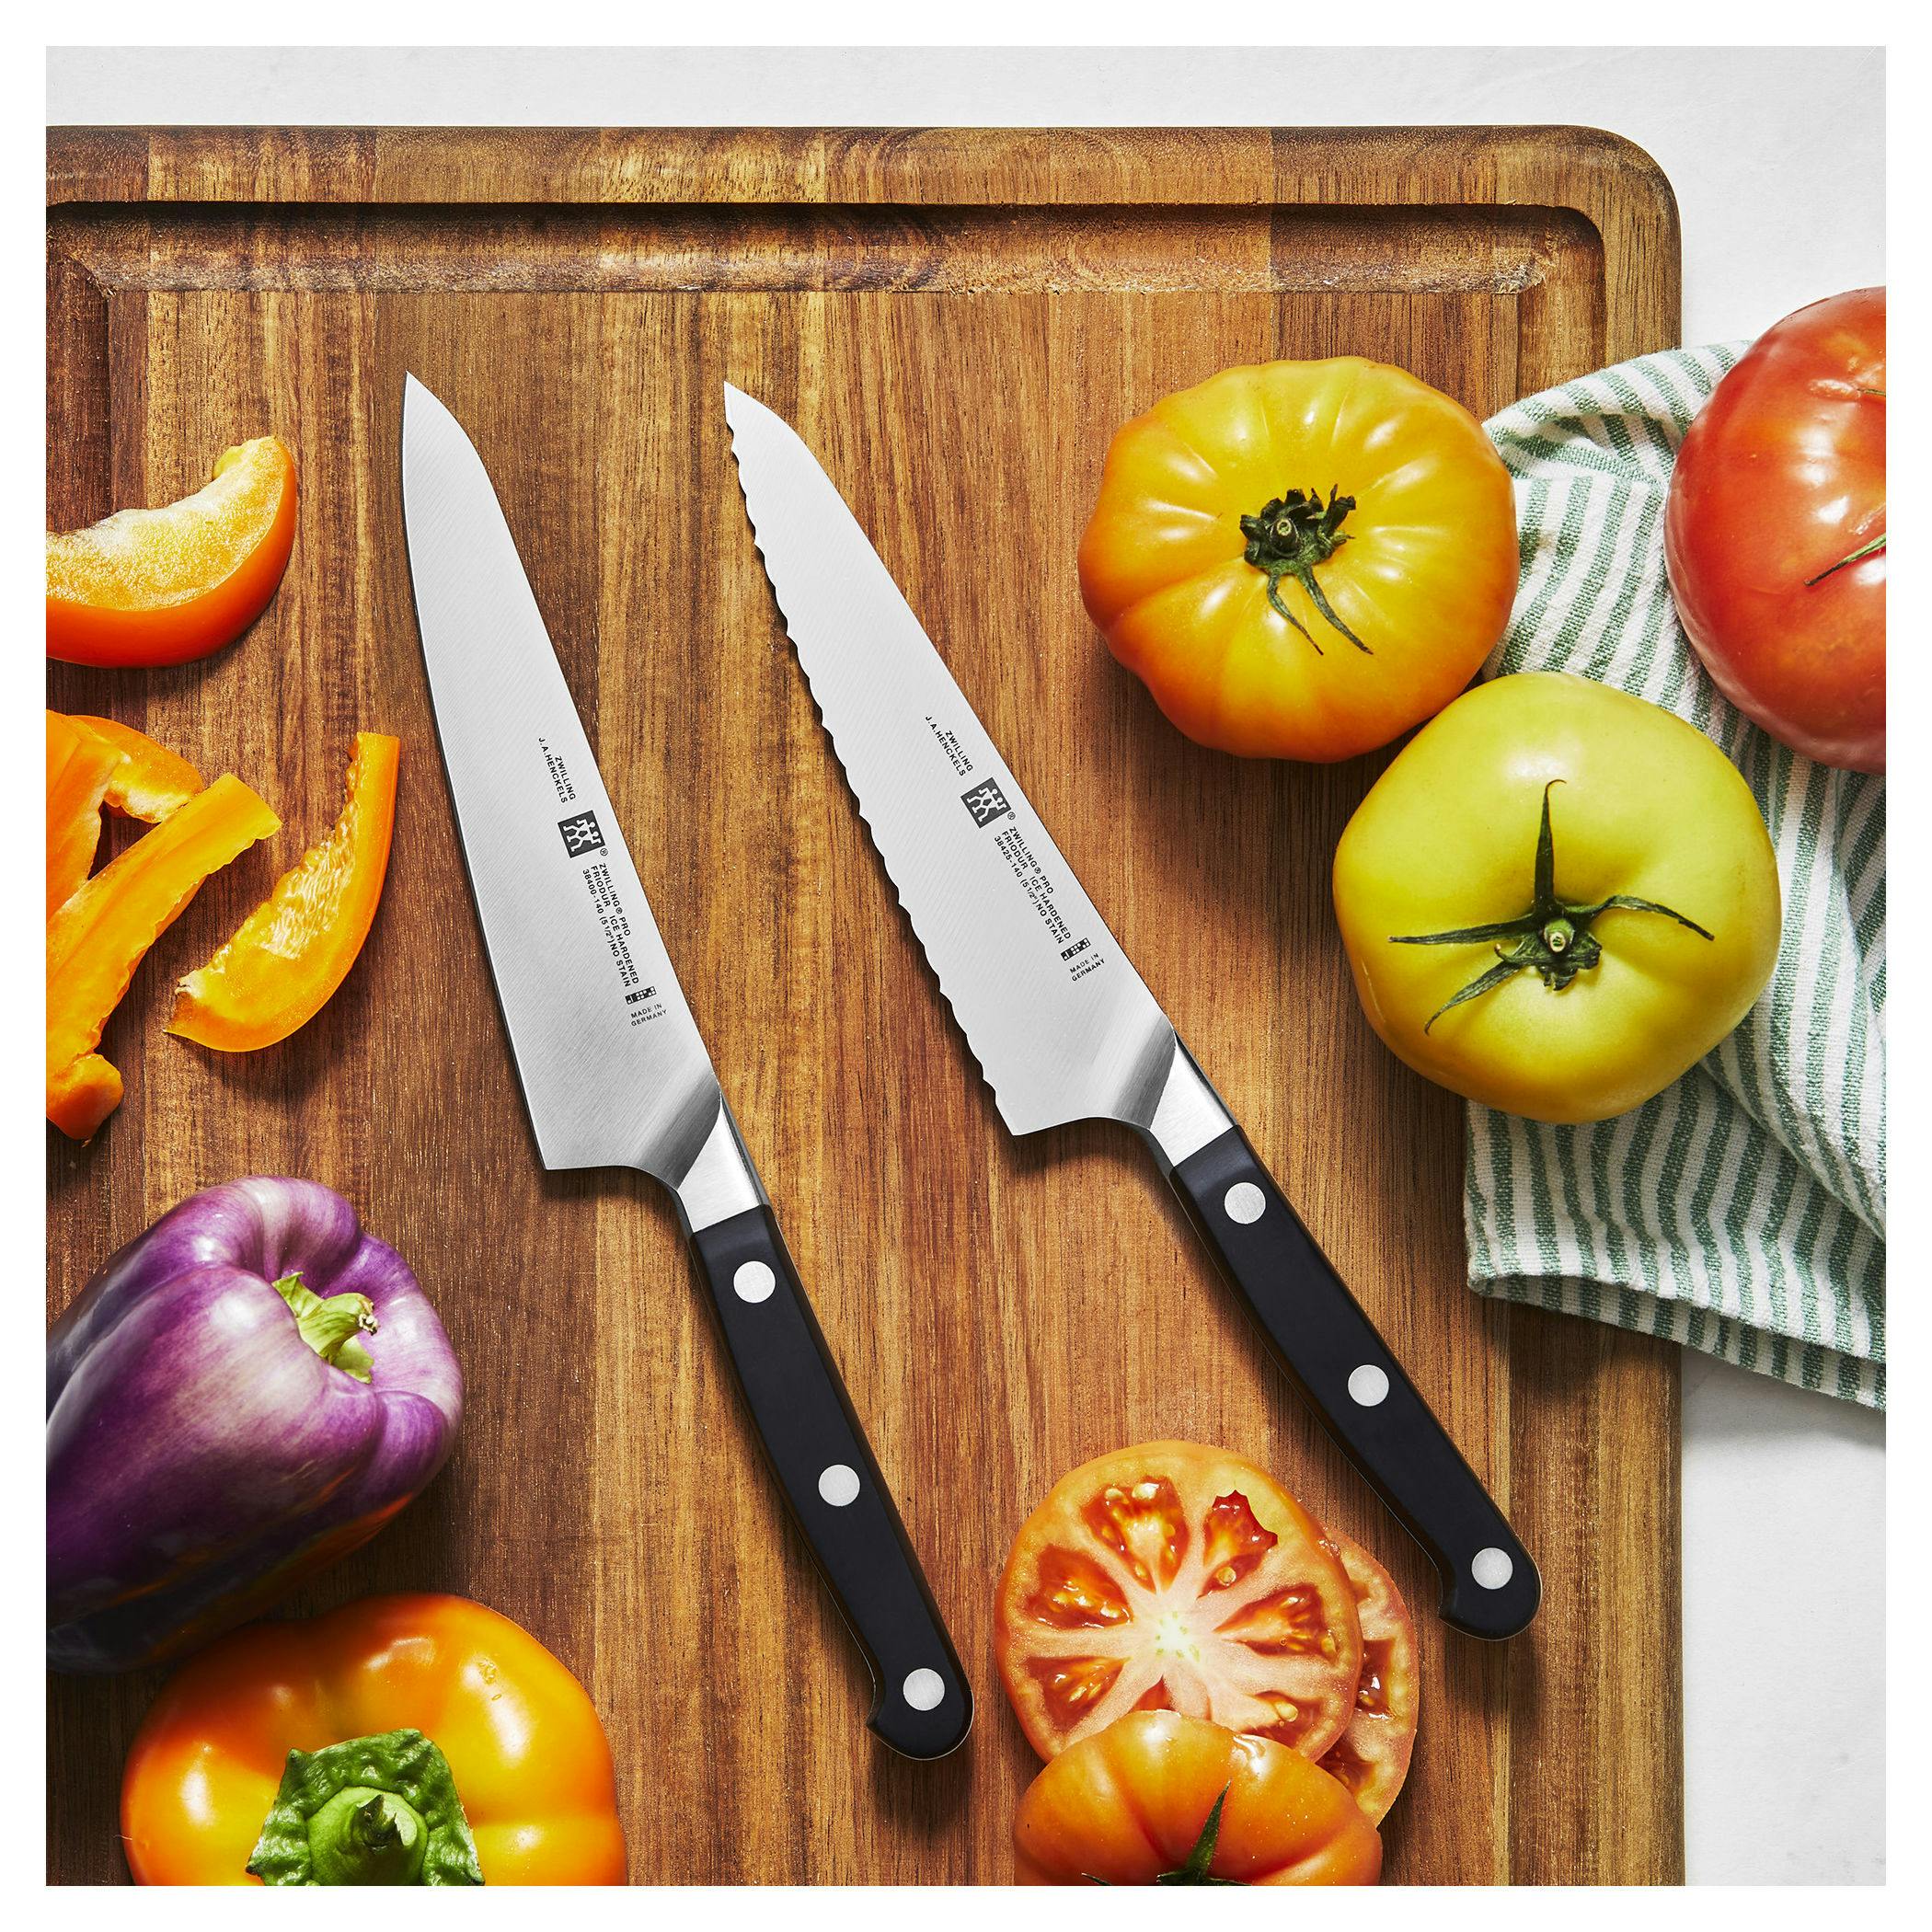 Buy ZWILLING Cutting boards Knife set